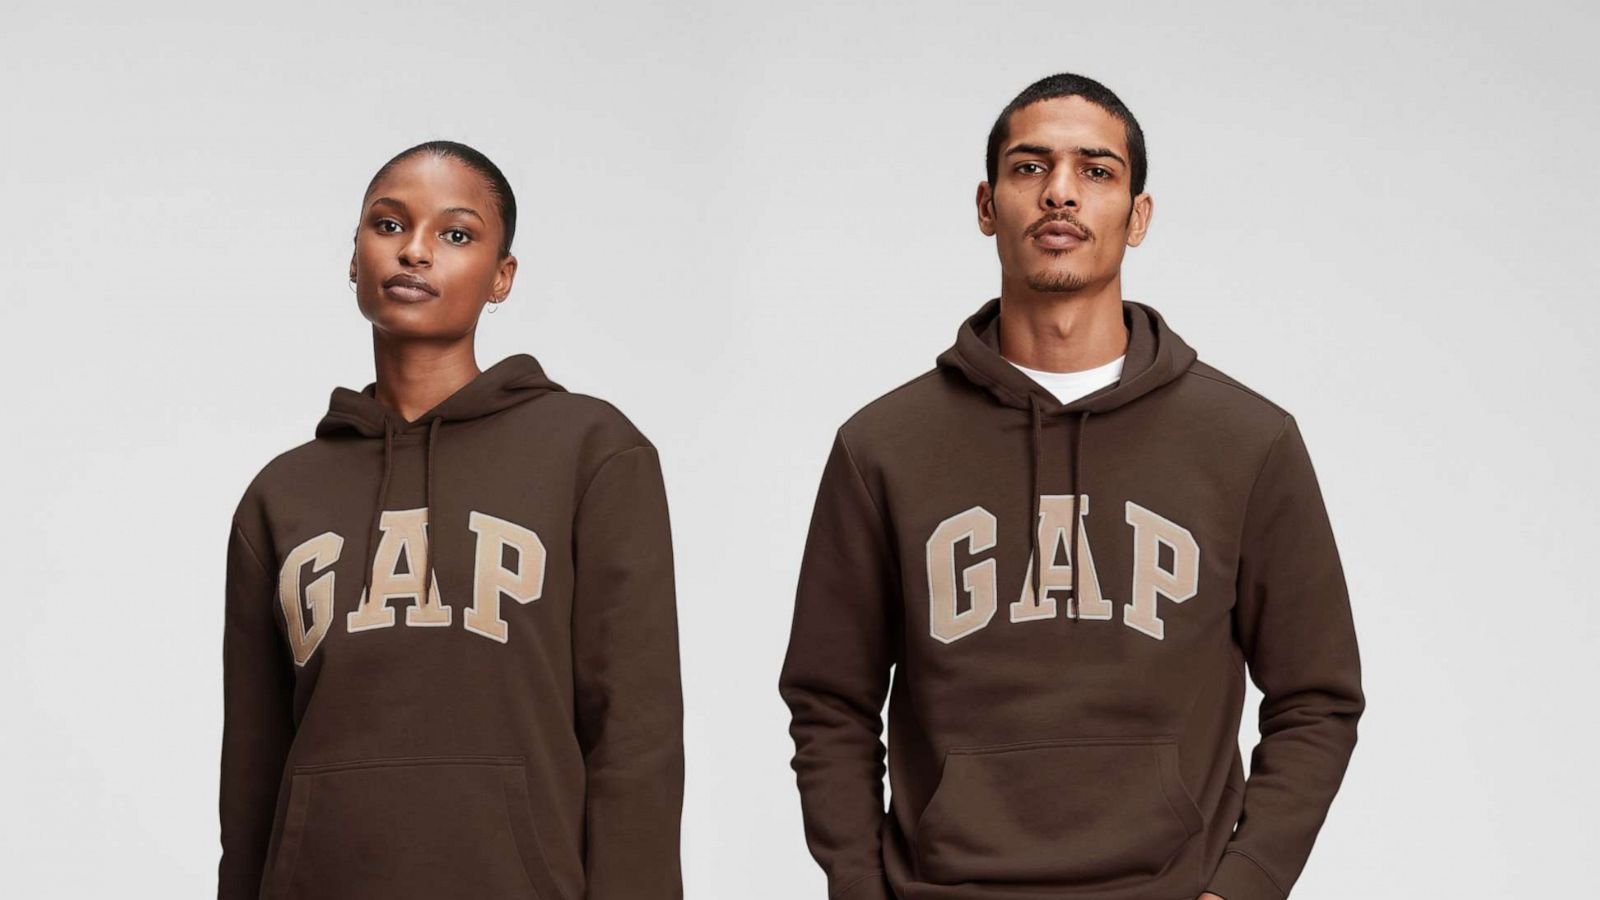 classic brown logo hoodie is making a comeback, thanks to TikTok - Morning America